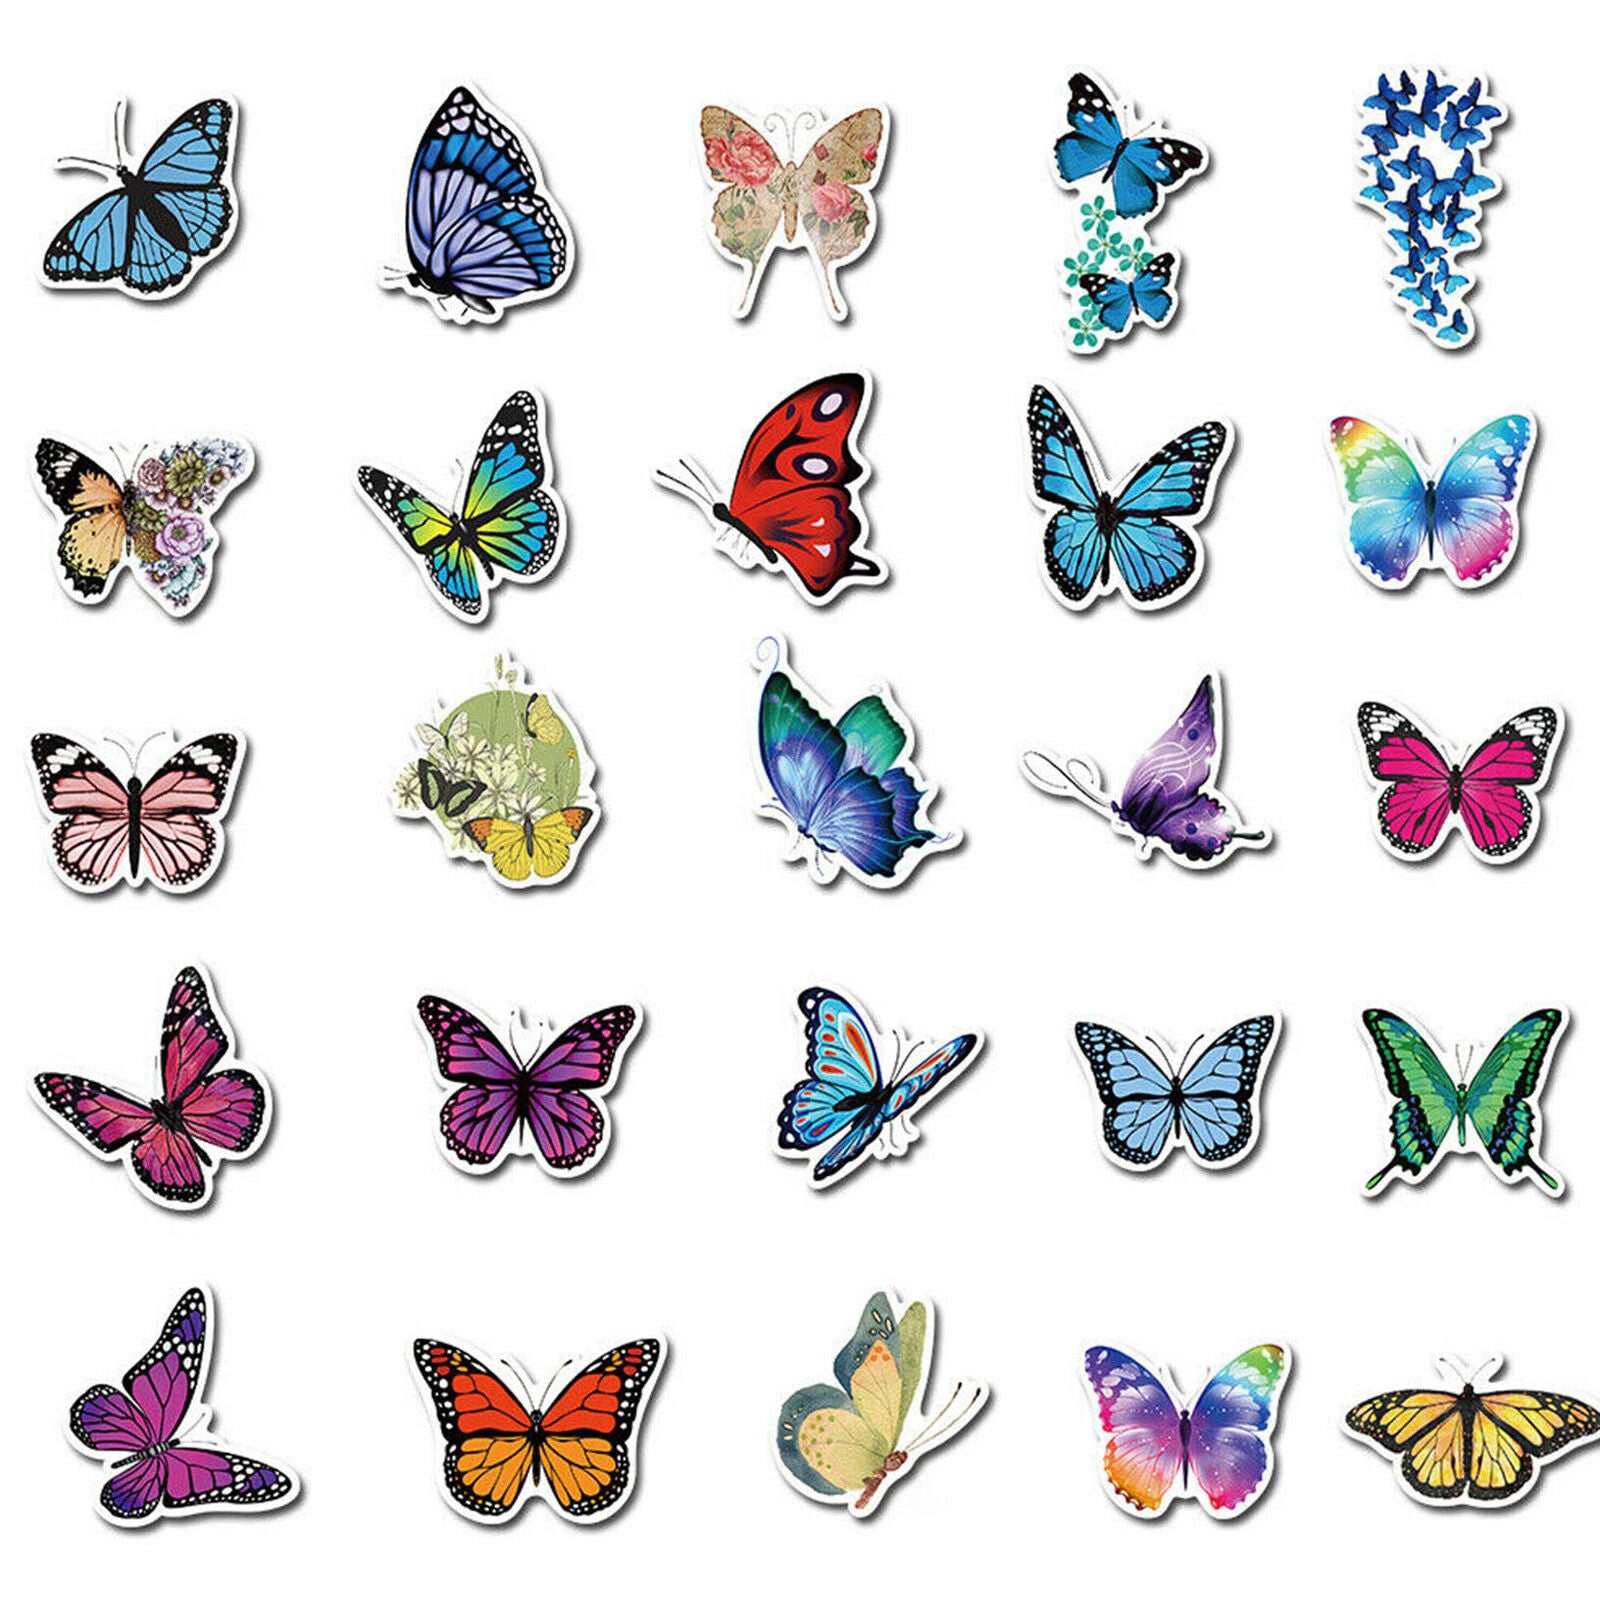 Colorful Butterfly Stickers 50 Pcs Decals for Water Bottle Laptop Luggage Crafts